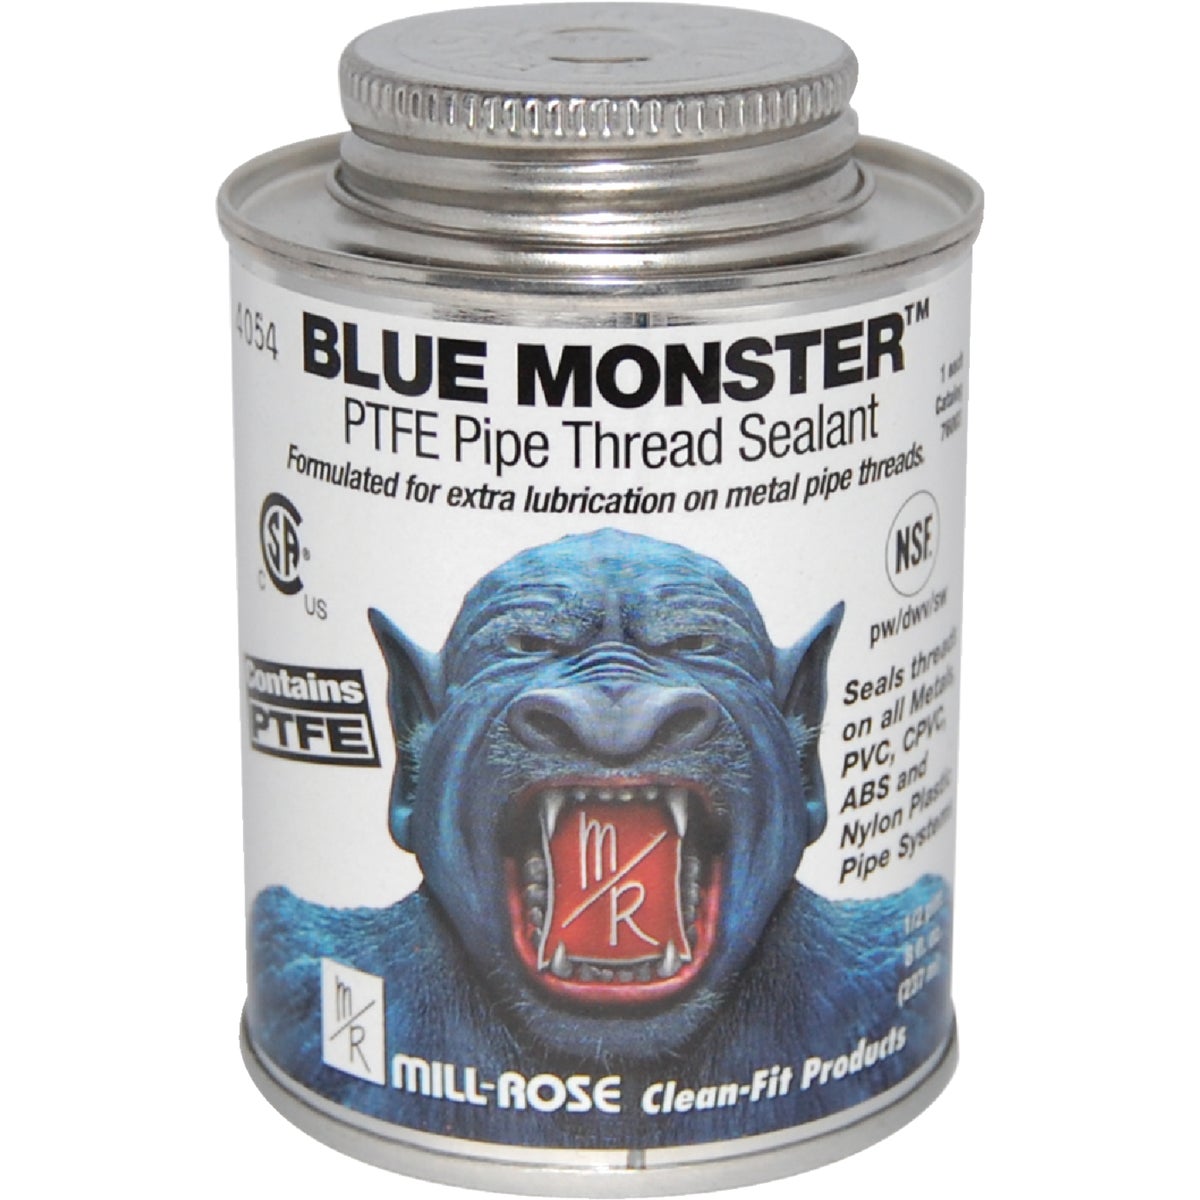 Item 404327, Blue Monster PTFE pipe thread sealant is formulated with PTFE resin, a 